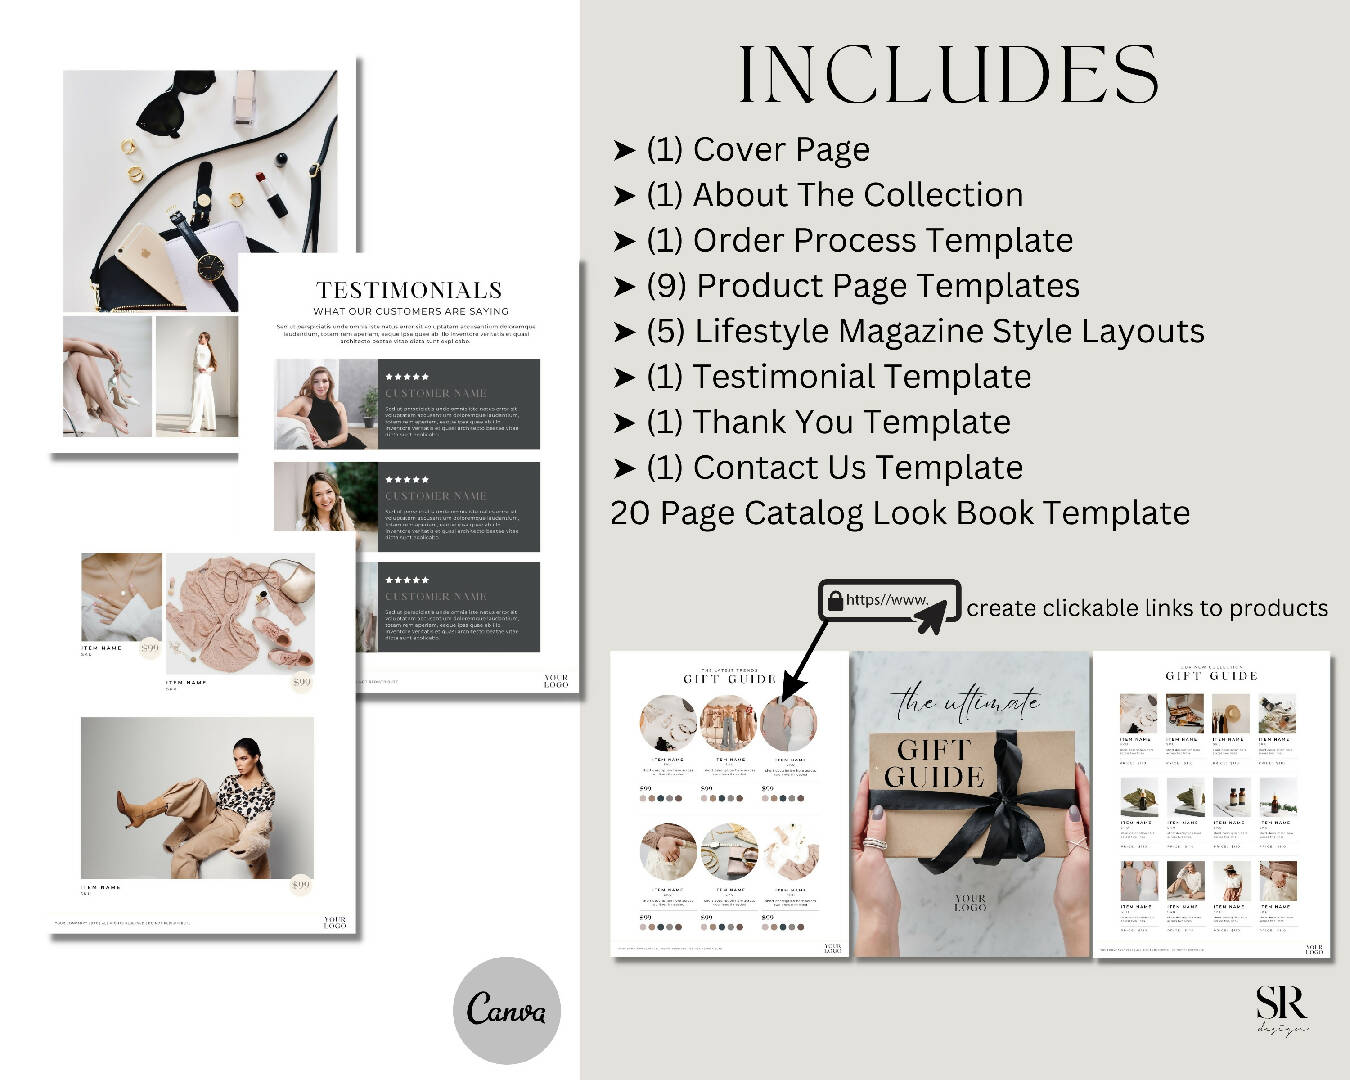 Ultimate Look Book Product Catalog | Shopping Guide | Gift Guide Canva Template | Home Decor Style or Fashion Guide